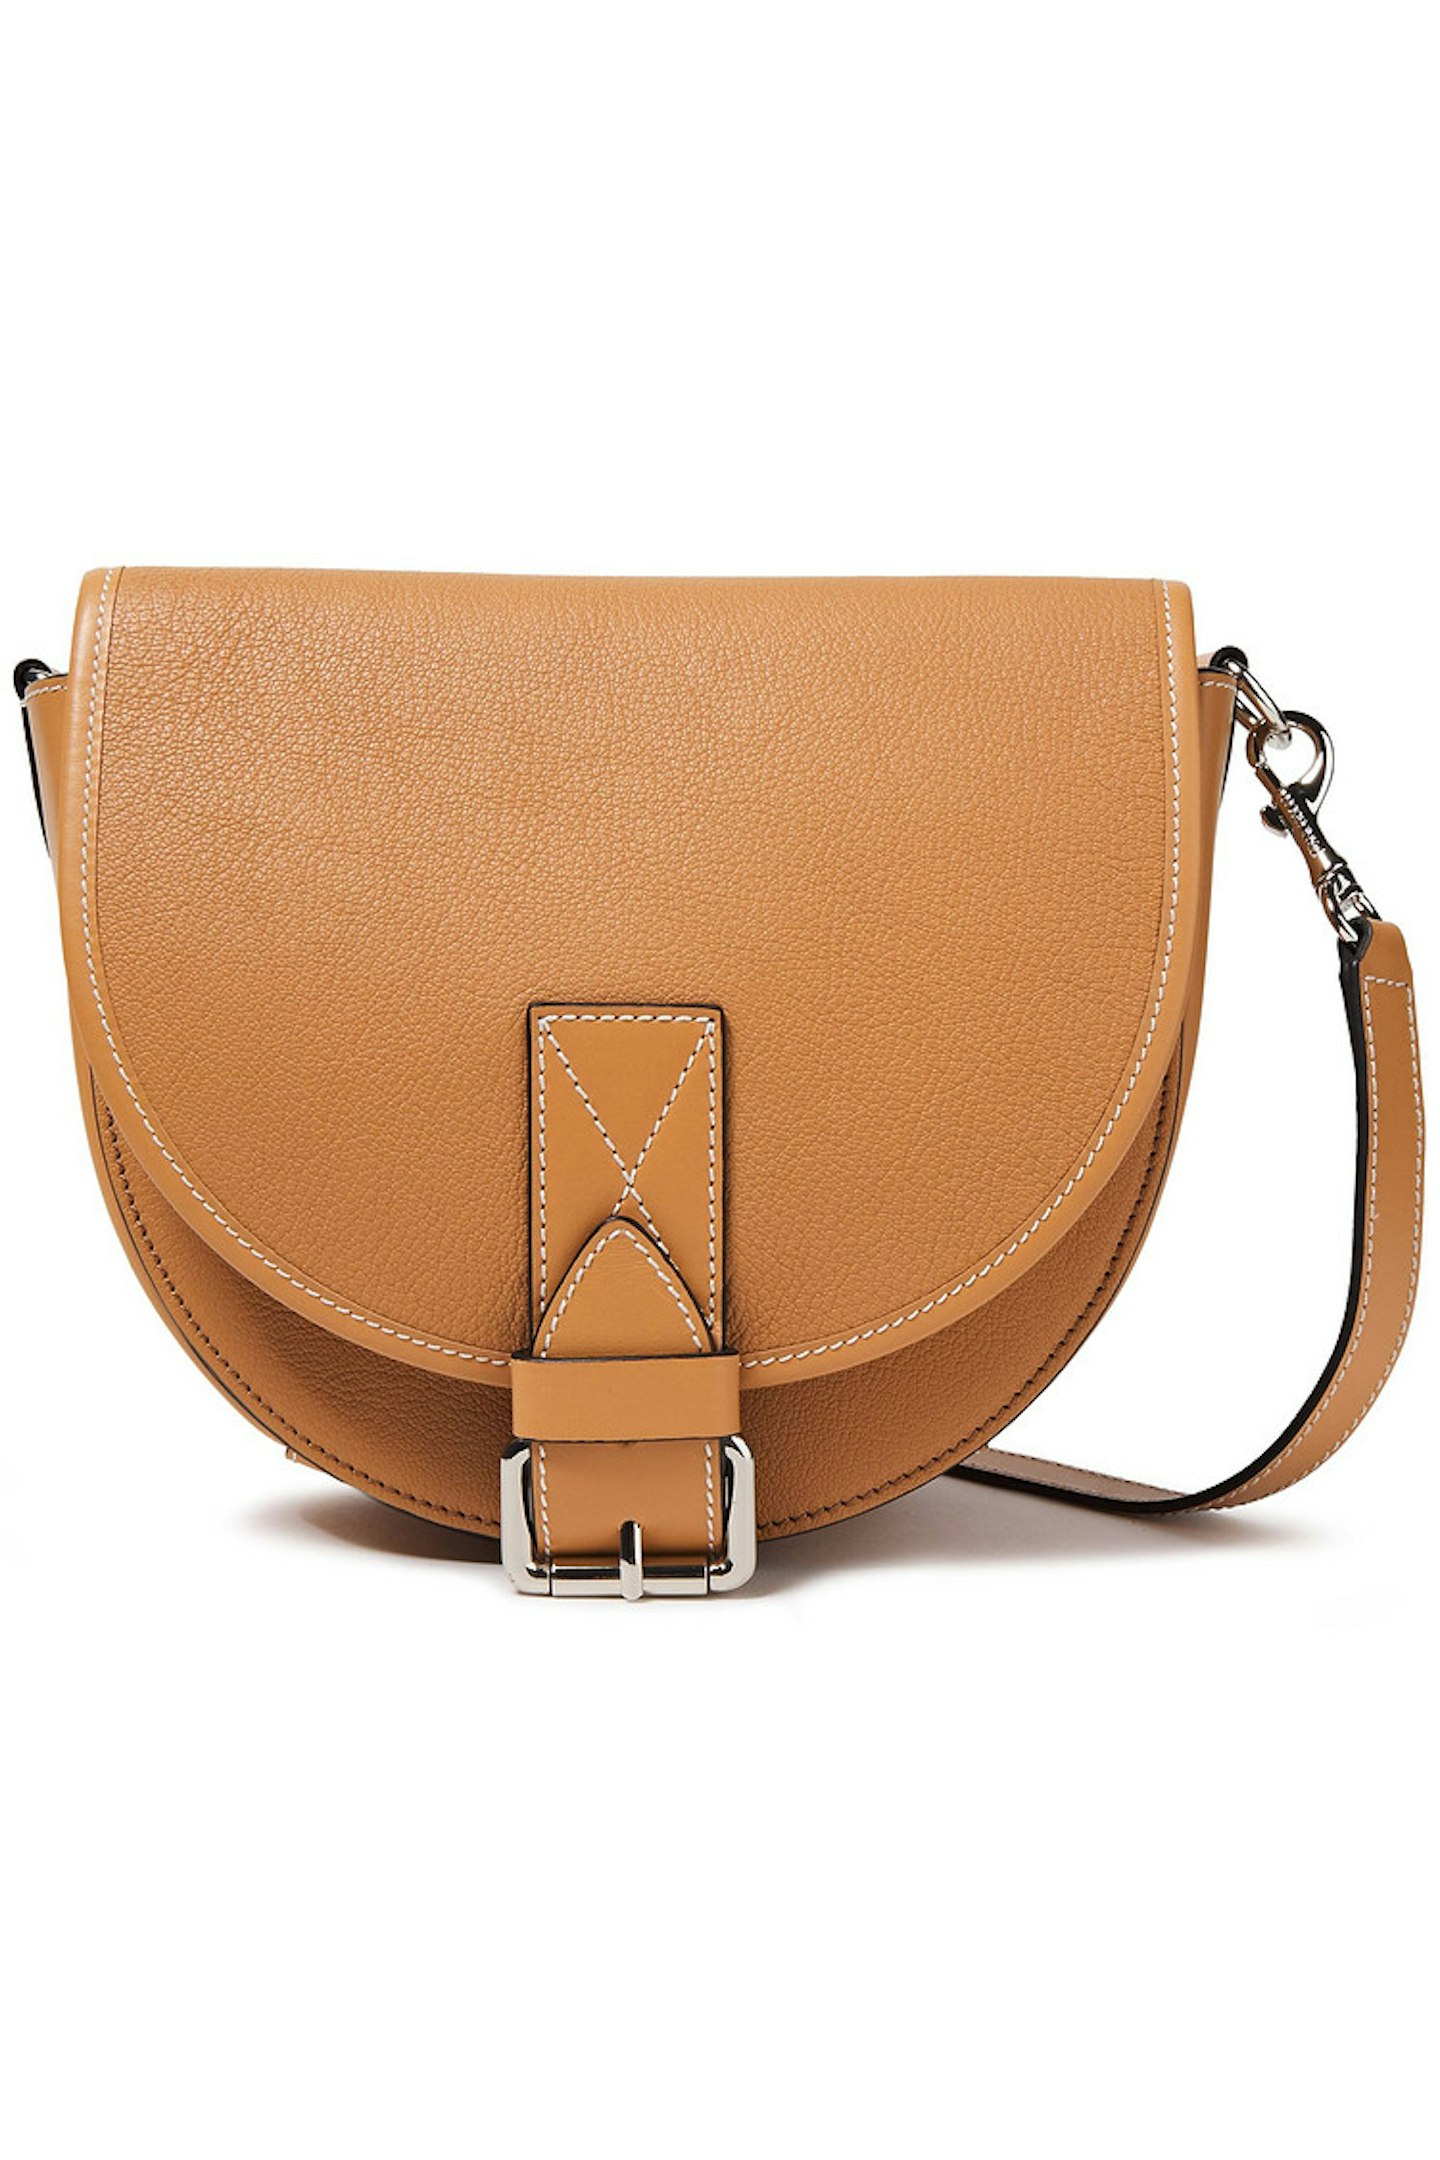 J W Anderson, Bike small smooth and textured-leather shoulder bag , WAS £890, NOW £294